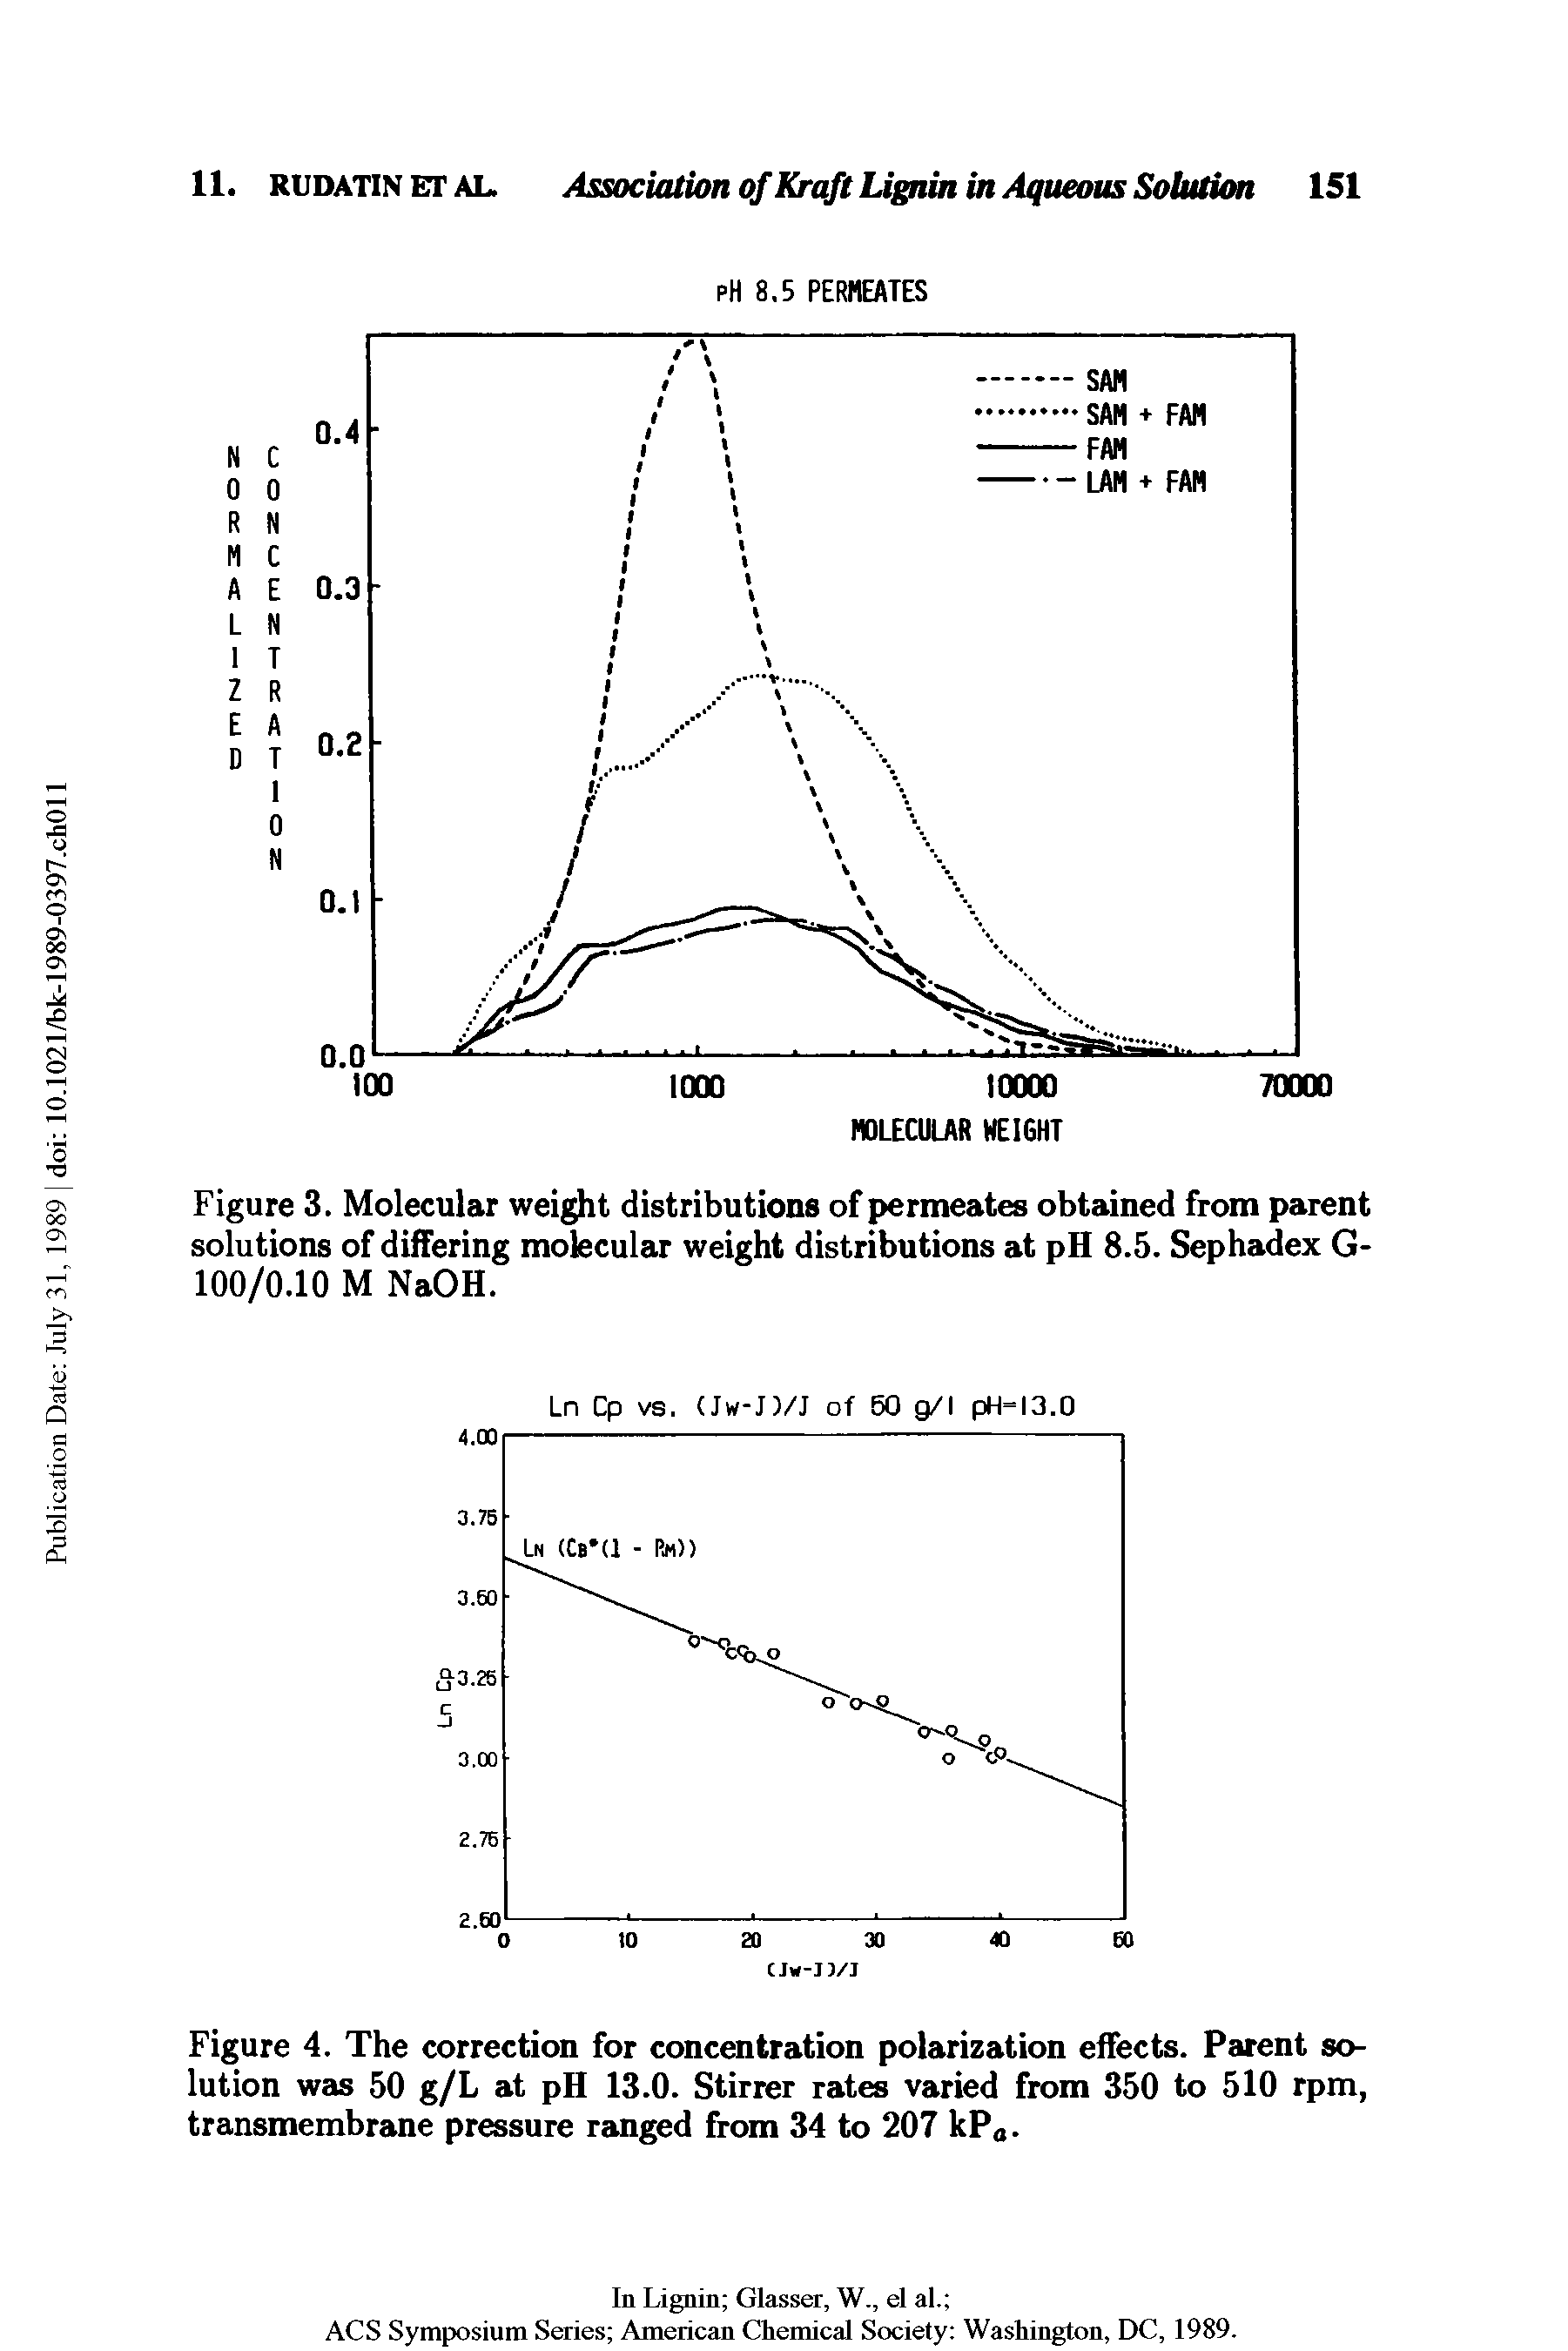 Figure 3. Molecular weight distributions of permeates obtained from parent solutions of differing molecular weight distributions at pH 8.5. Sephadex G-100/0.10 M NaOH.